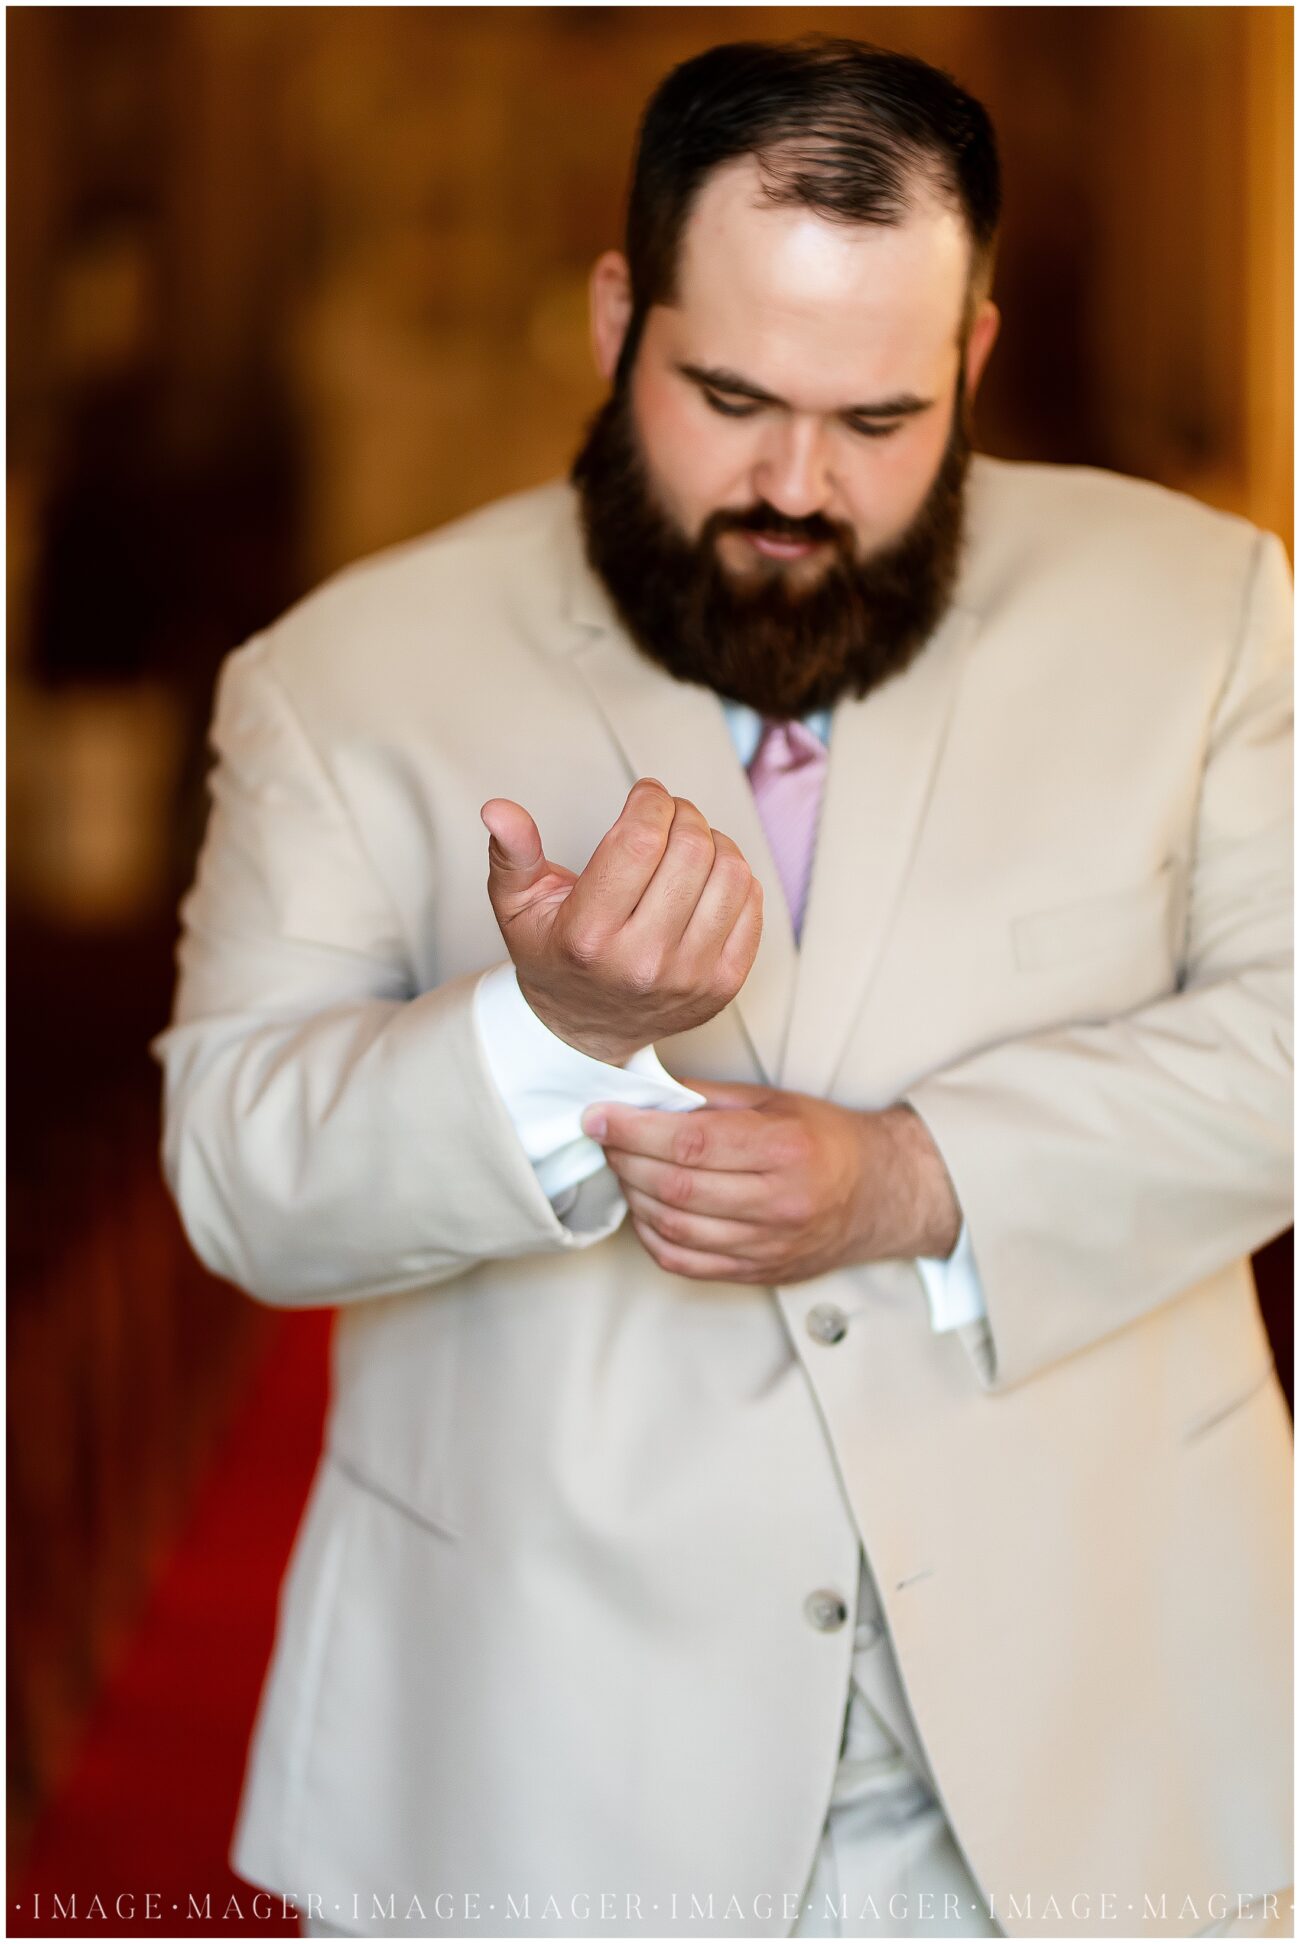 A small town wedding getting ready photo of the groom putting on his cuff links.

L'erable, IL. Photo taken by Mager Image Photography.